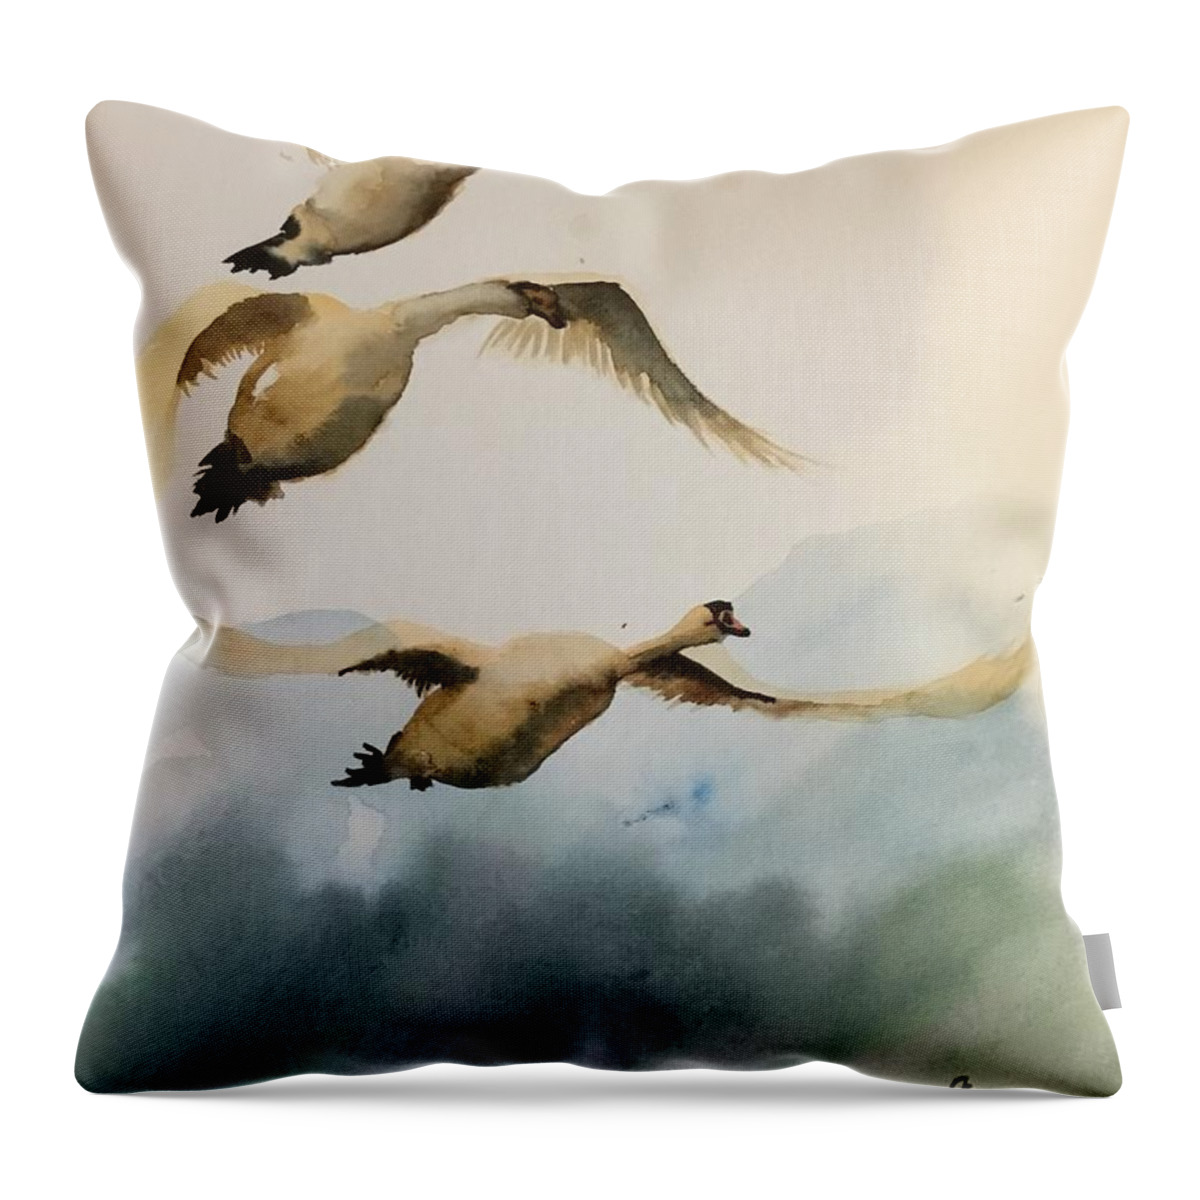 Let’s Fly Throw Pillow featuring the painting 1082019 by Han in Huang wong